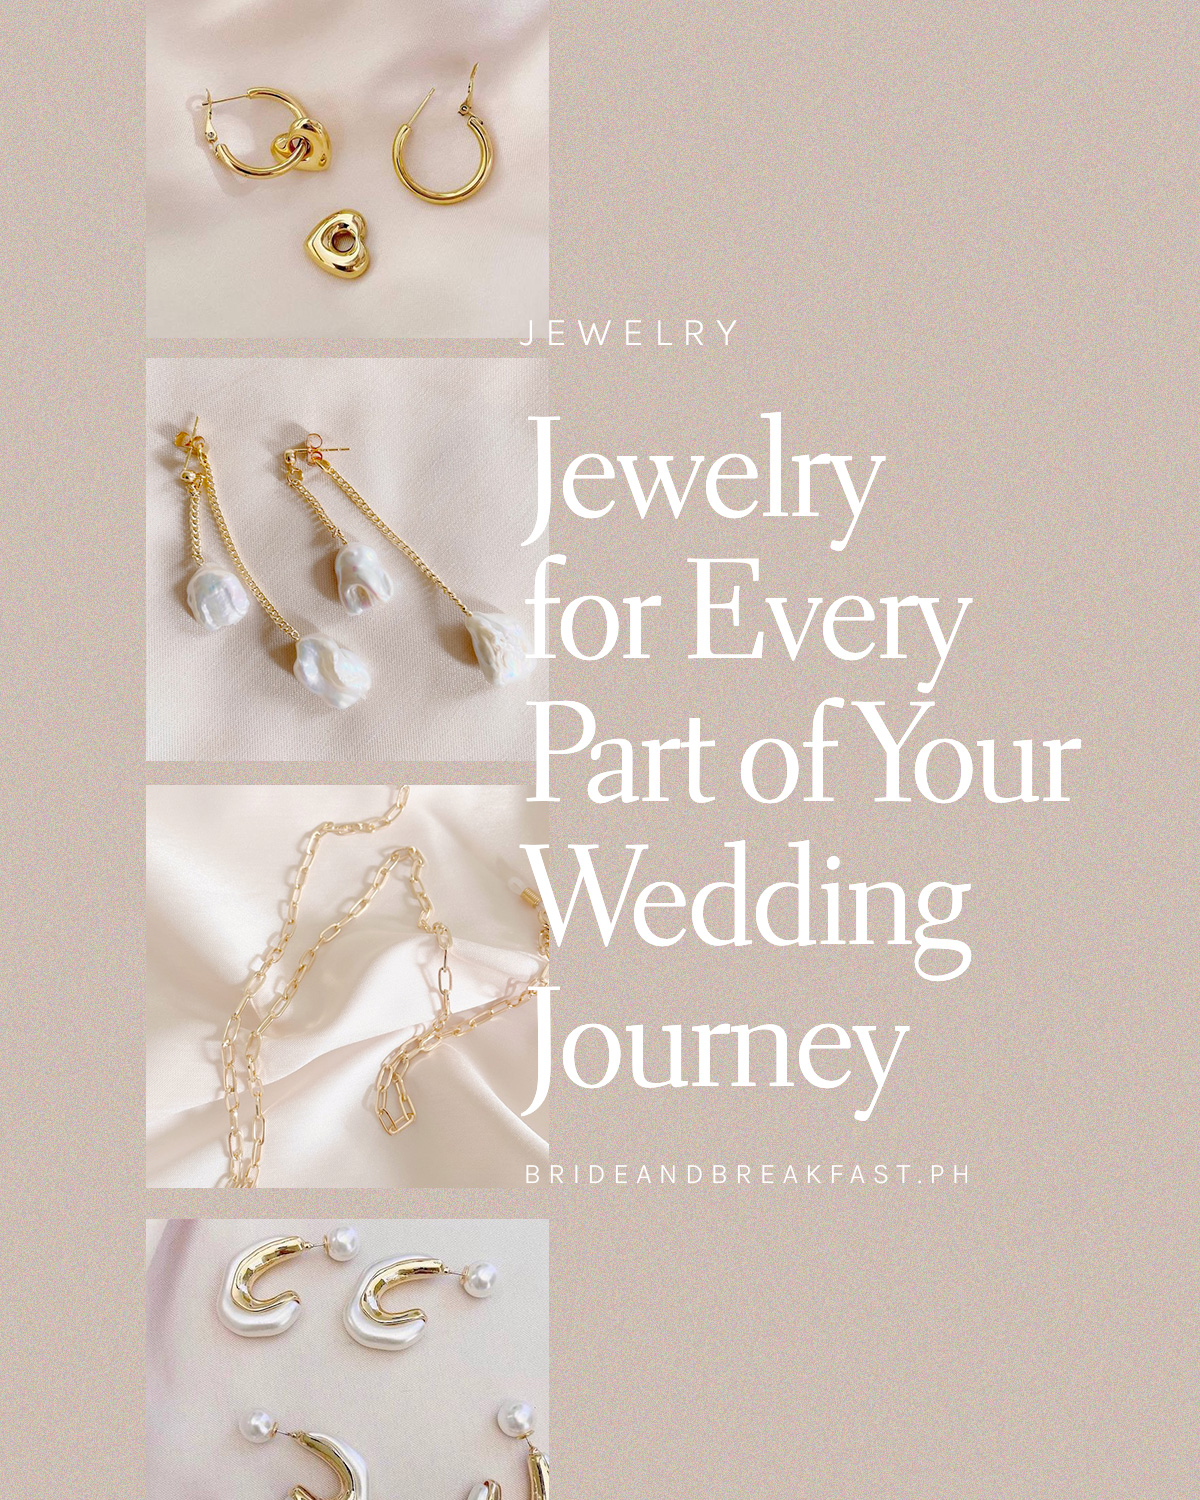 Jewelry for Every Part of Your Wedding Journey